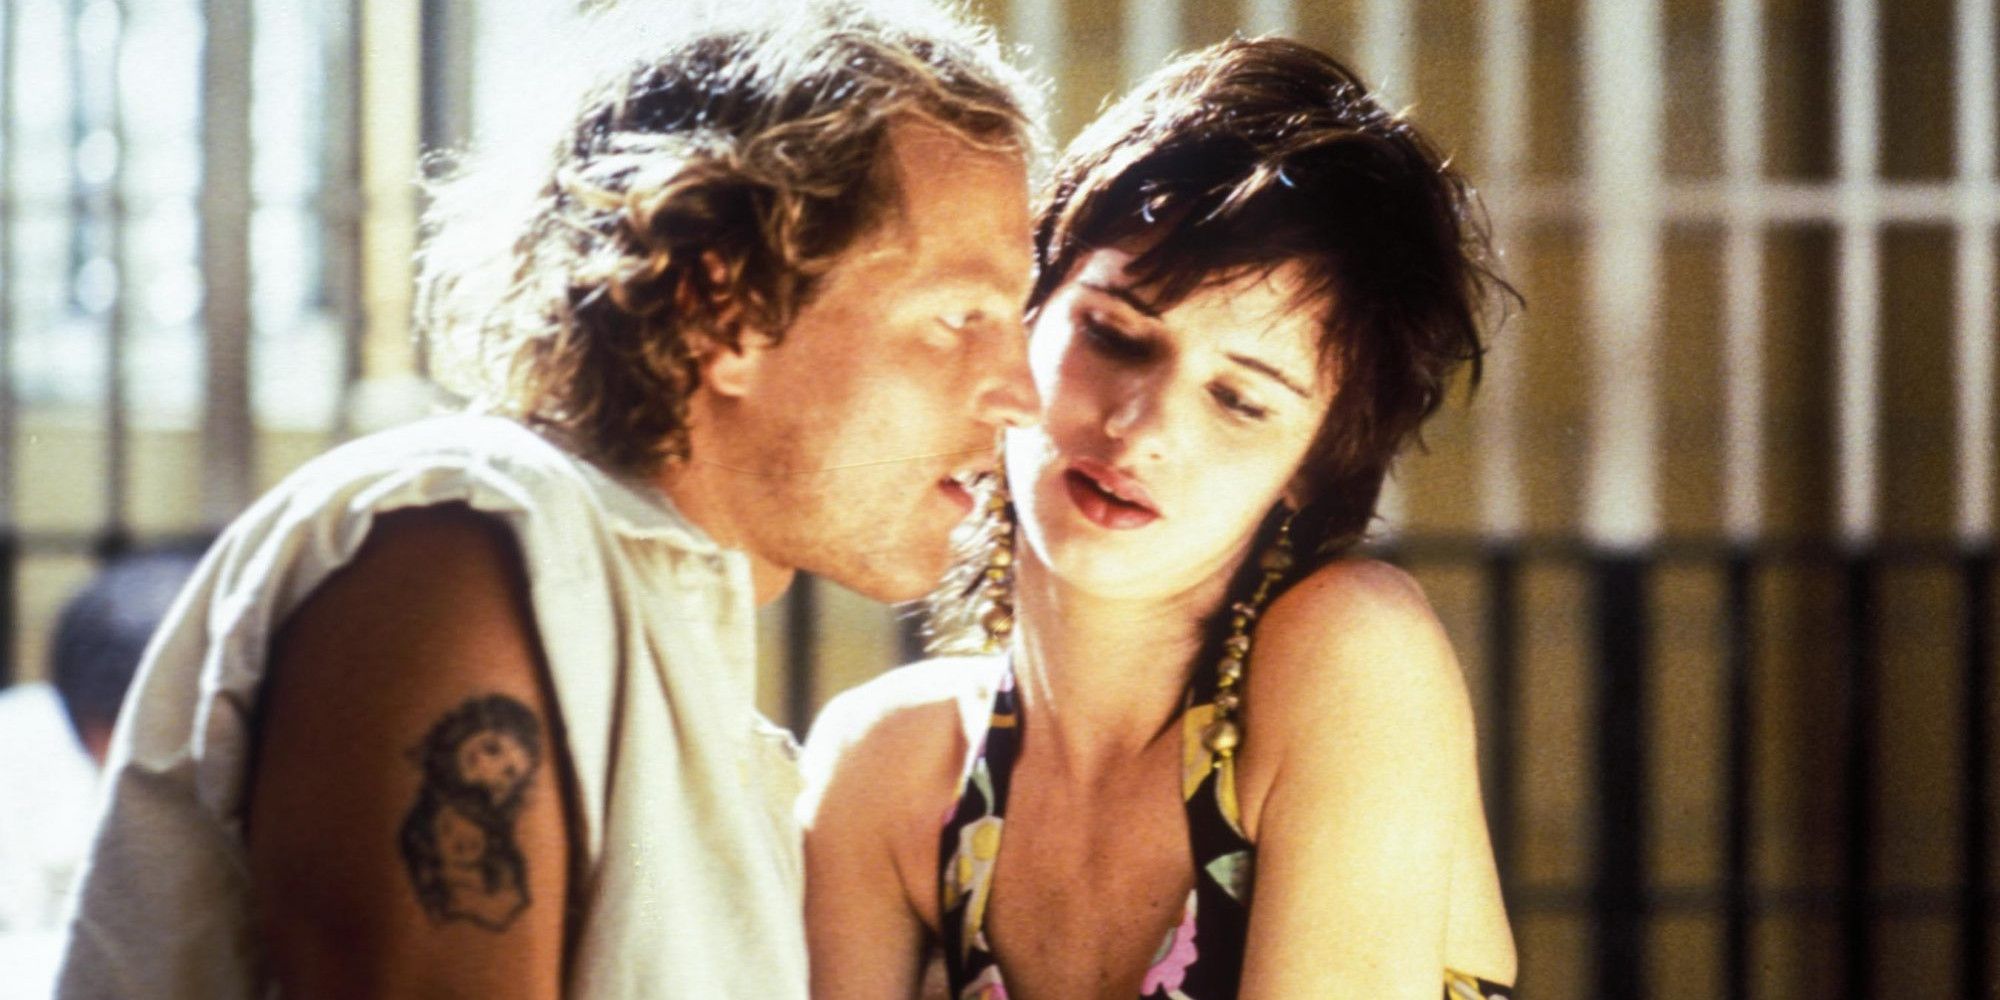 A woman talks to a man in jail in Natural Born Killers.